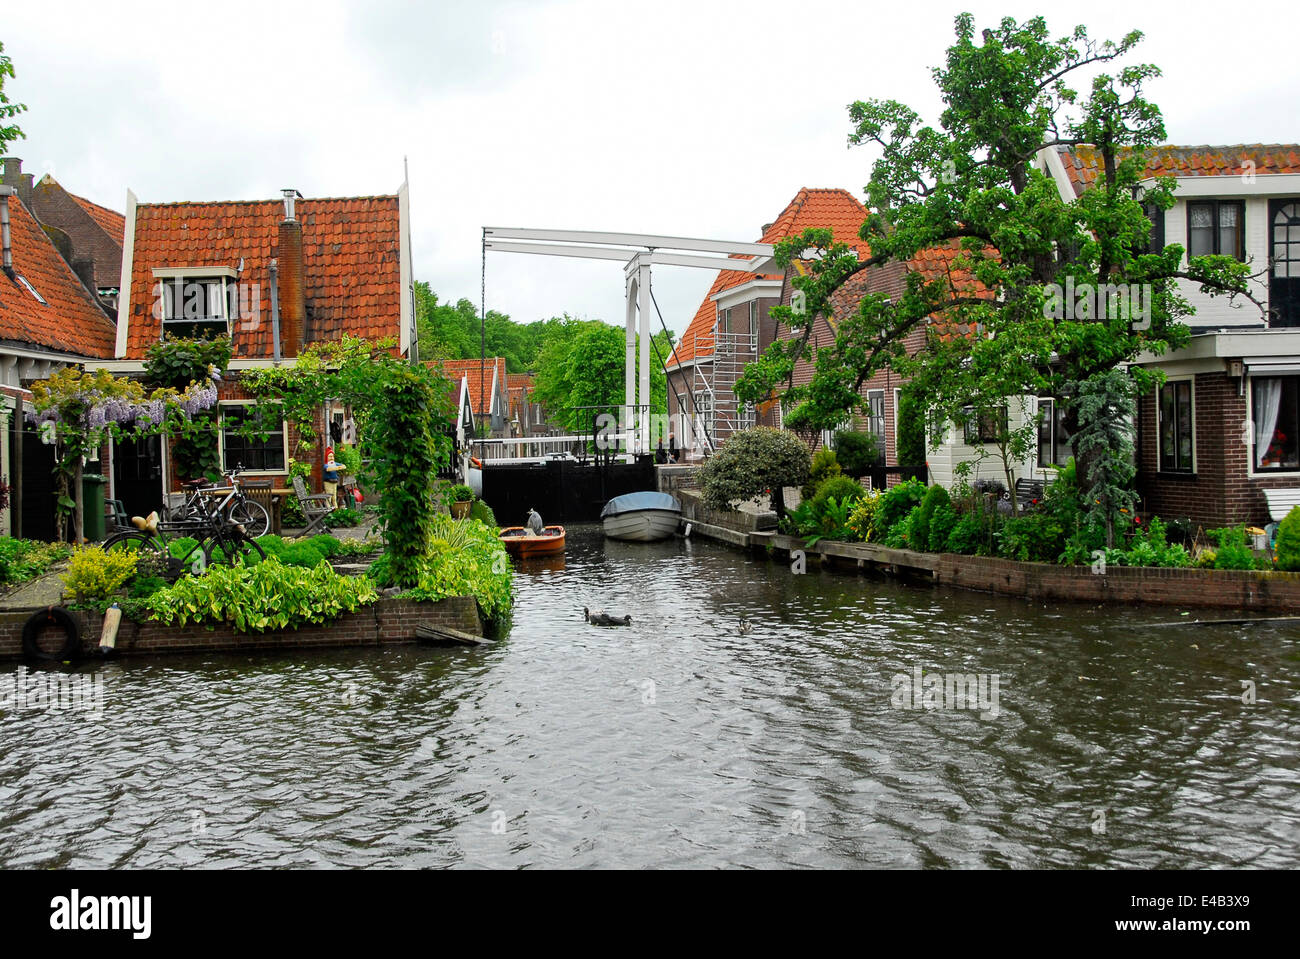 River and Dutch bridge in the Town of Edam, Netherlands Stock Photo